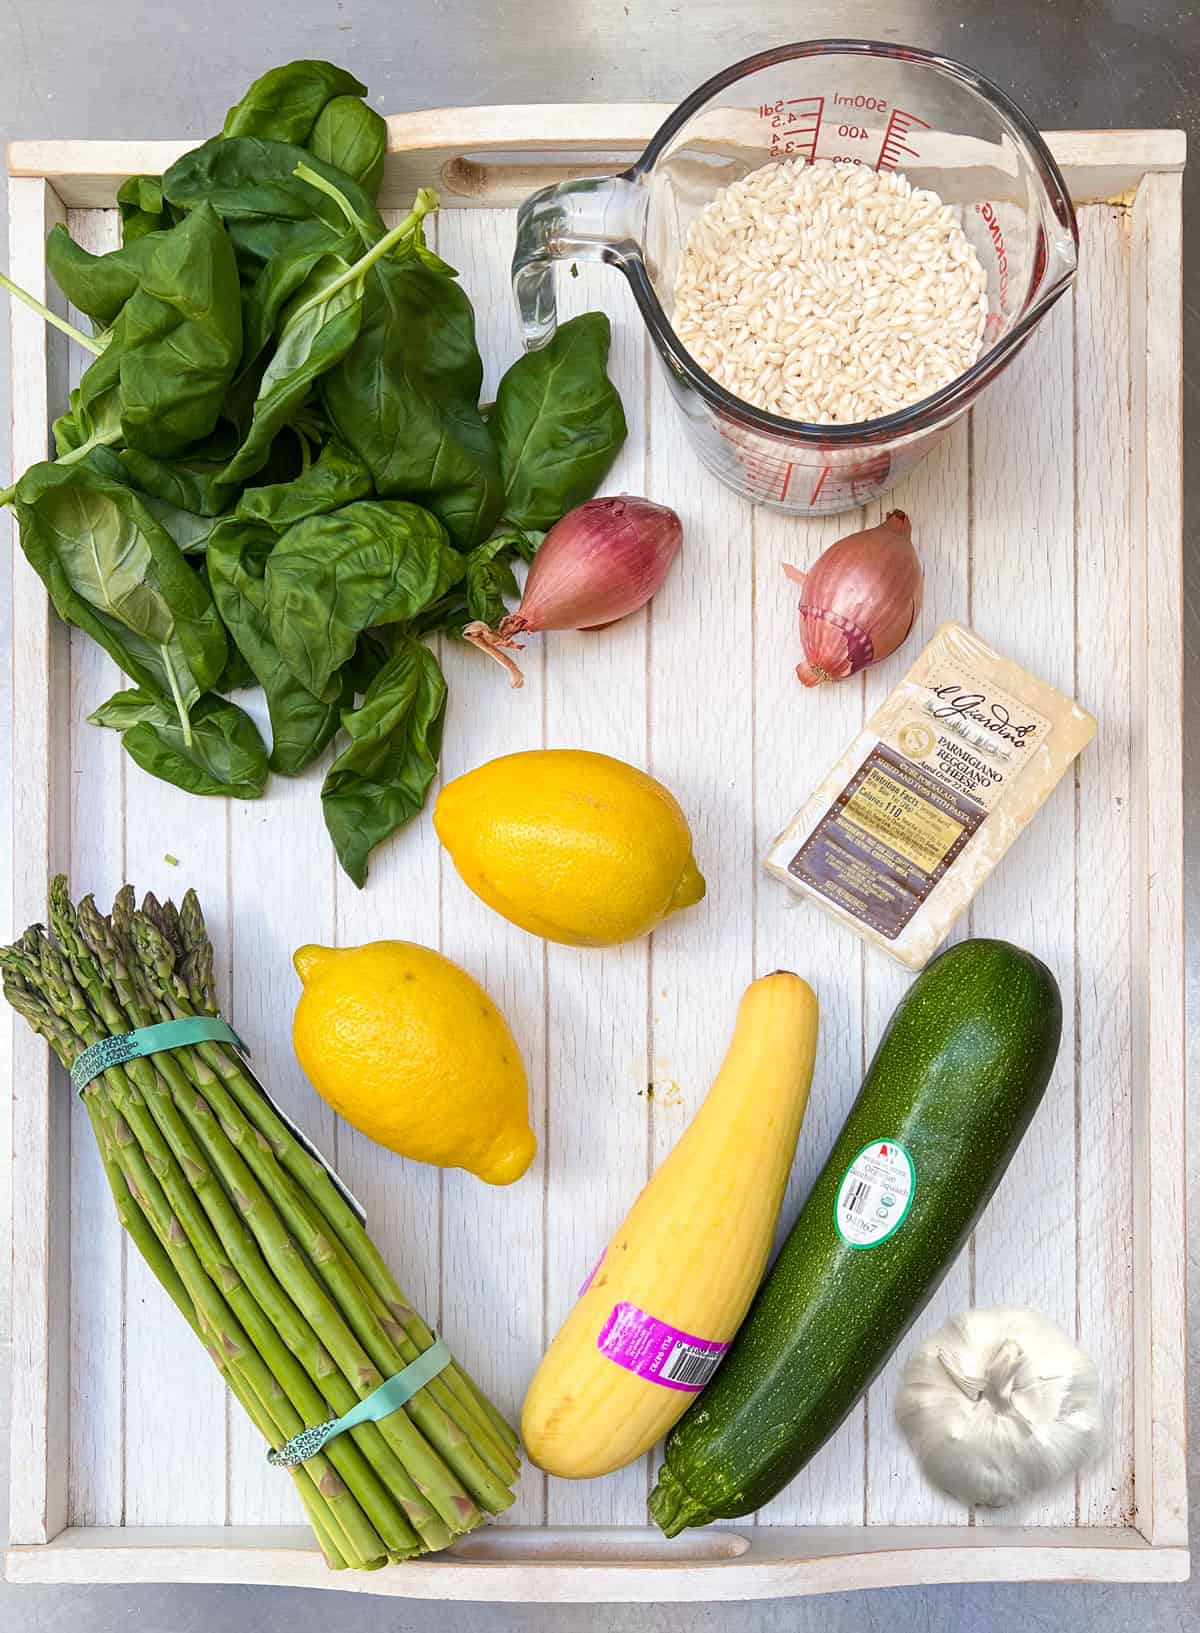 Risotto ingredients on a white wooden tray: two summer squash, a bunch of asparagus, 2 lemons, a bulb of garlic, a bunch of fresh basil, 2 shallots, a hunk of parmigiano-reggiano cheese, and a measuring cup filled with short grain rice